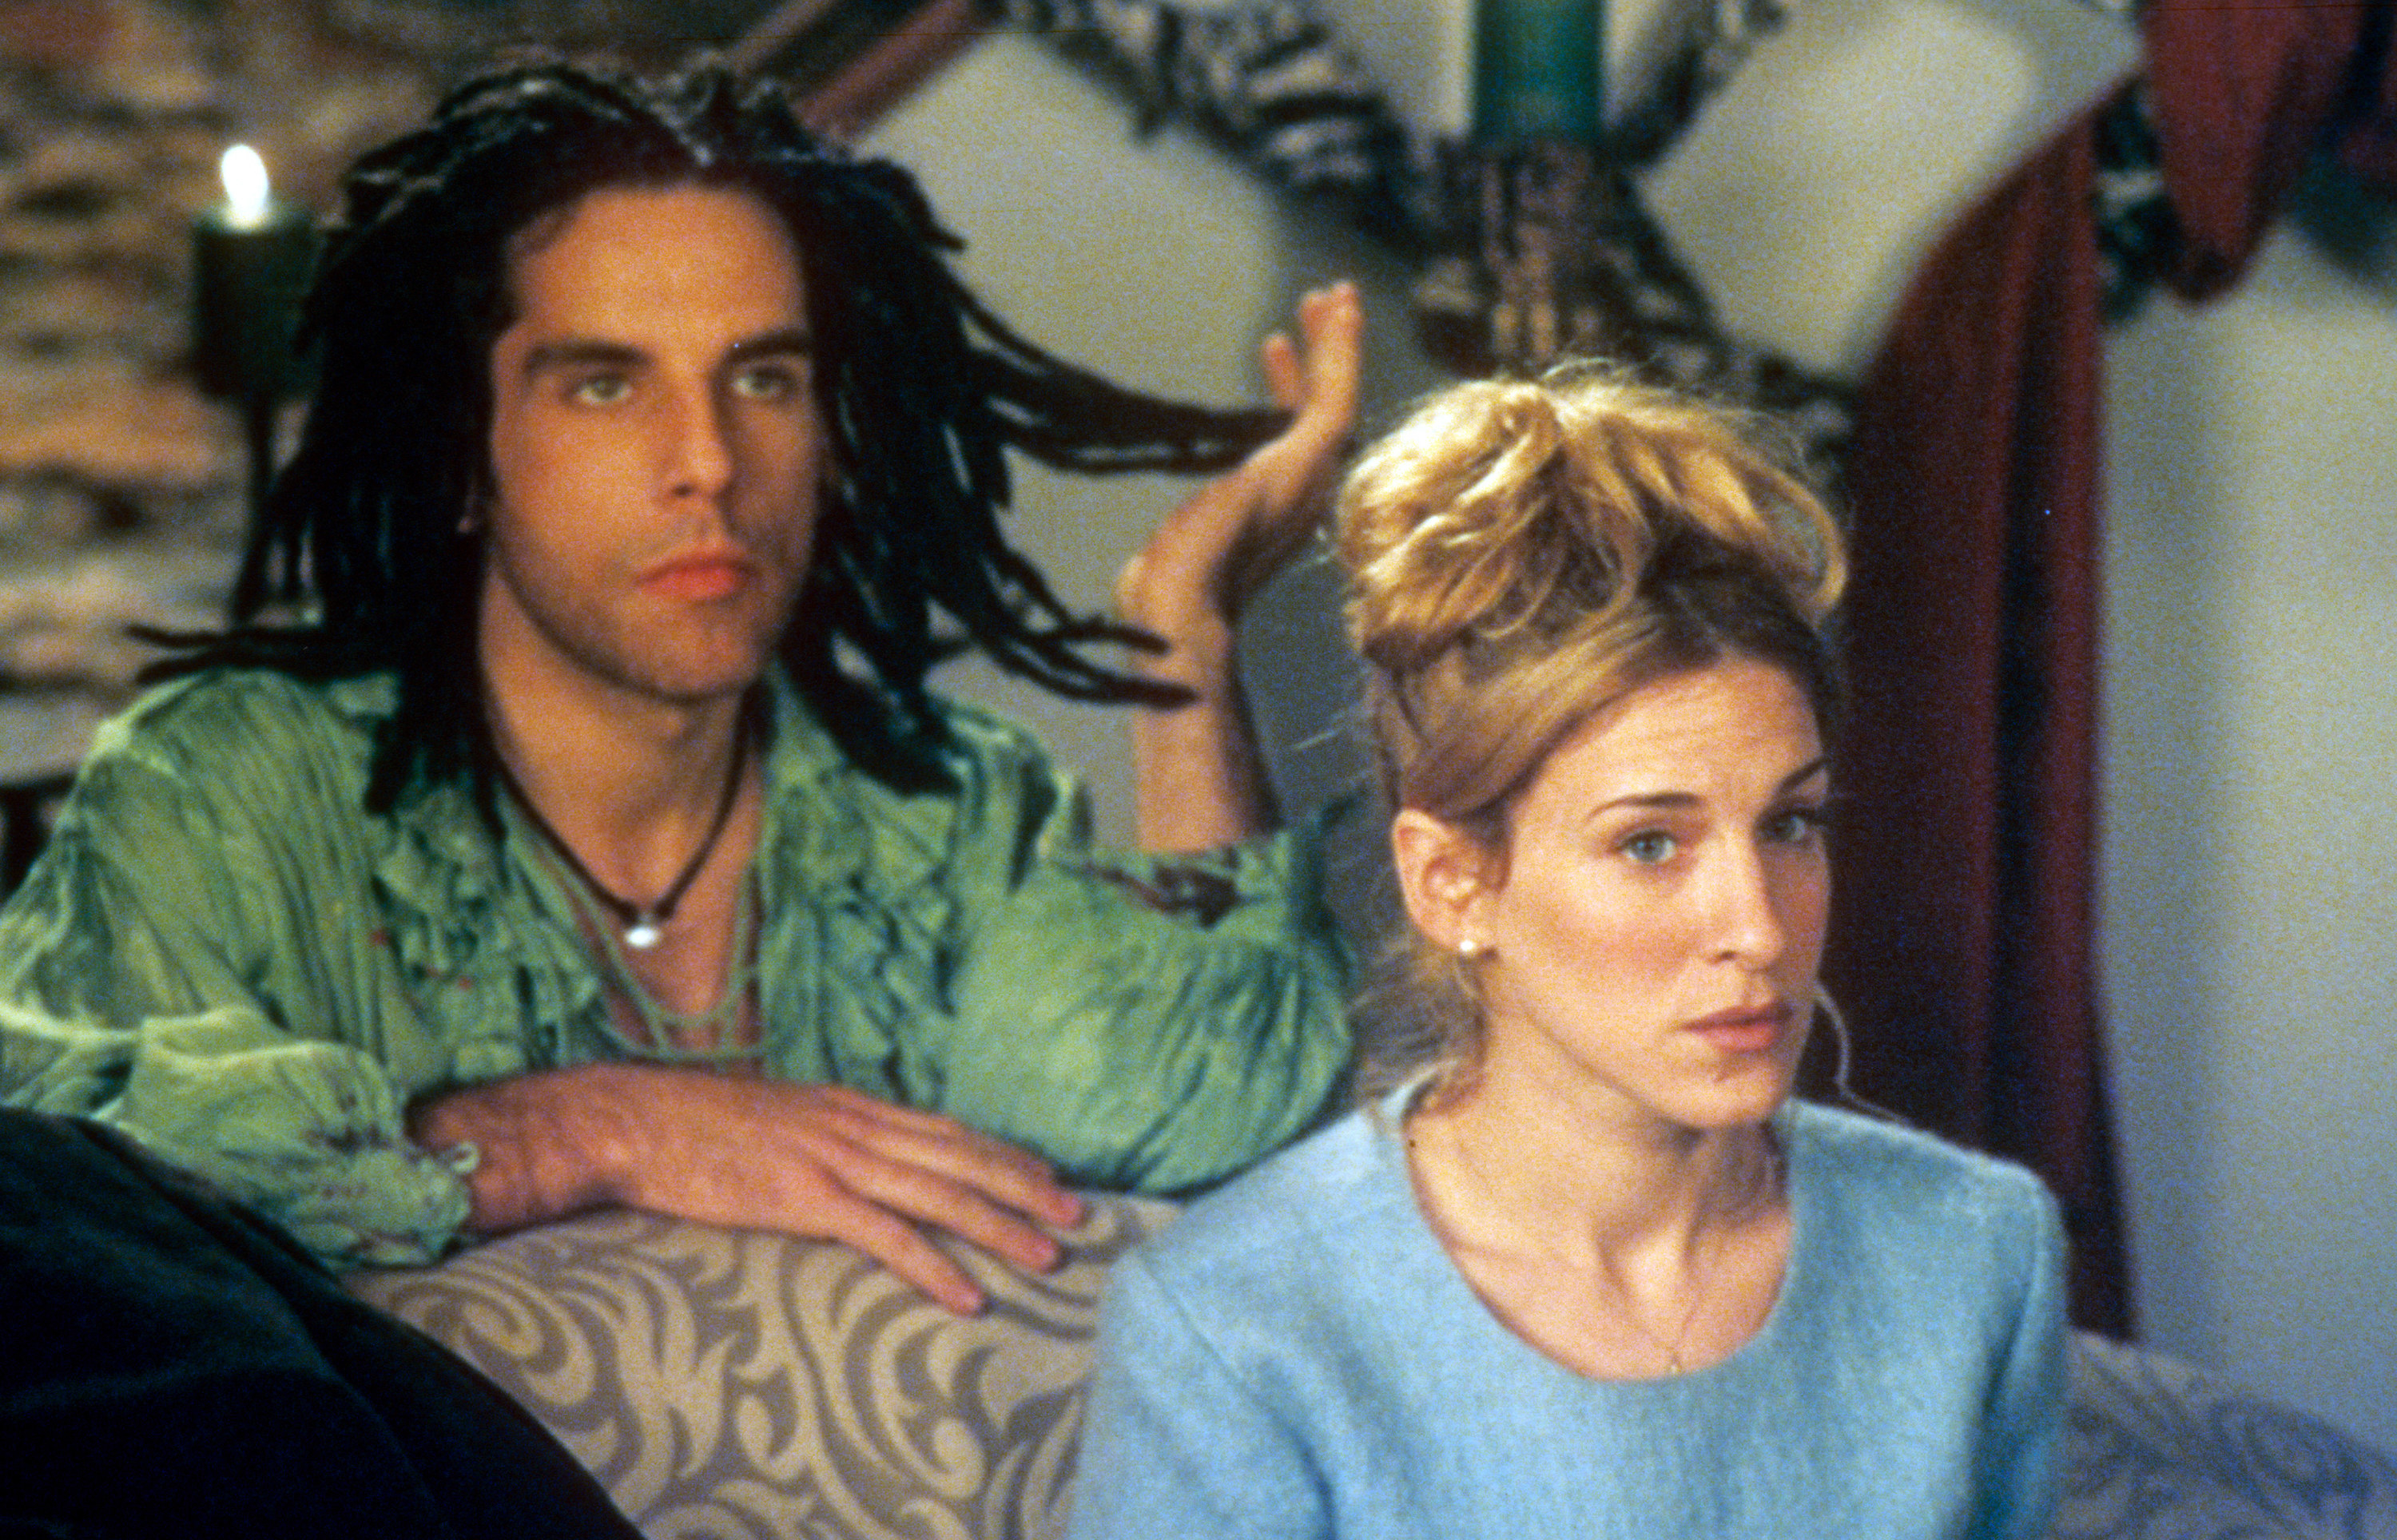 Ben Stiller kneeling behind Sarah Jessica Parker as he pulls at some of the dreadlocks on his head in a scene from the film &#x27;If Lucy Fell&#x27;